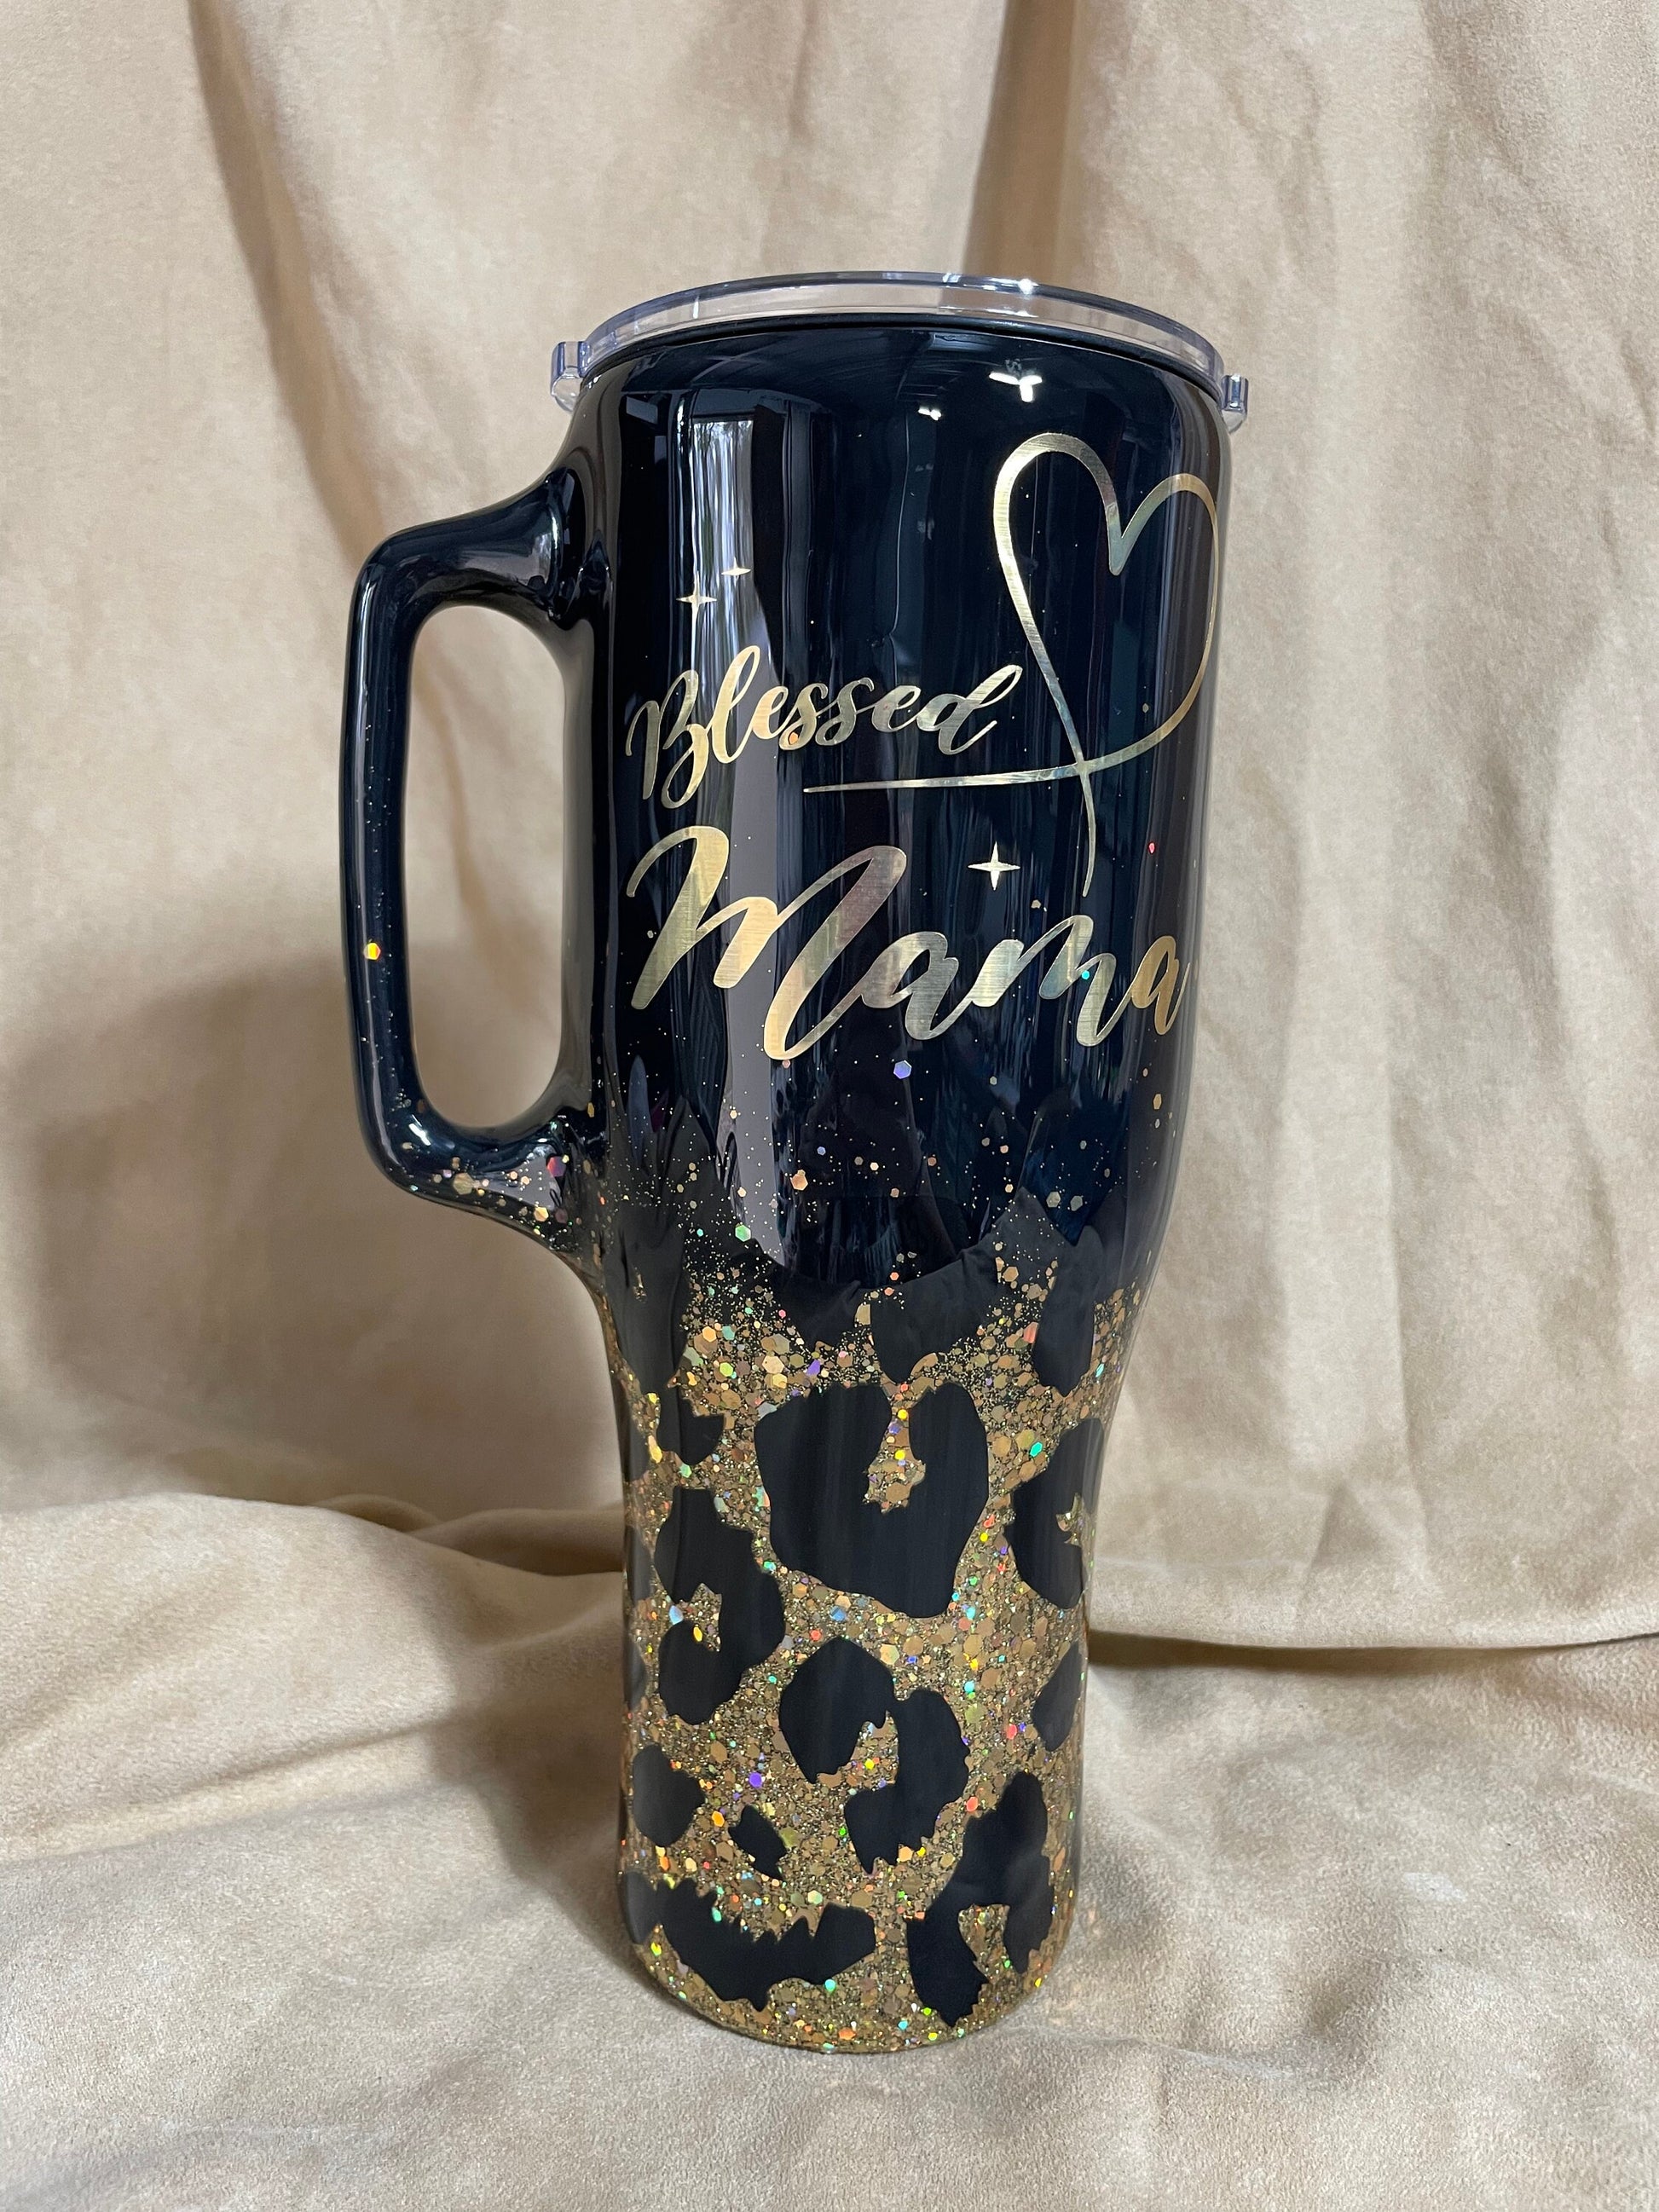 Animal print tumbler, glitter tumbler, black cup with gold glitter and gold lettering, gift for mother, daughter, sister, wife, girlfriend